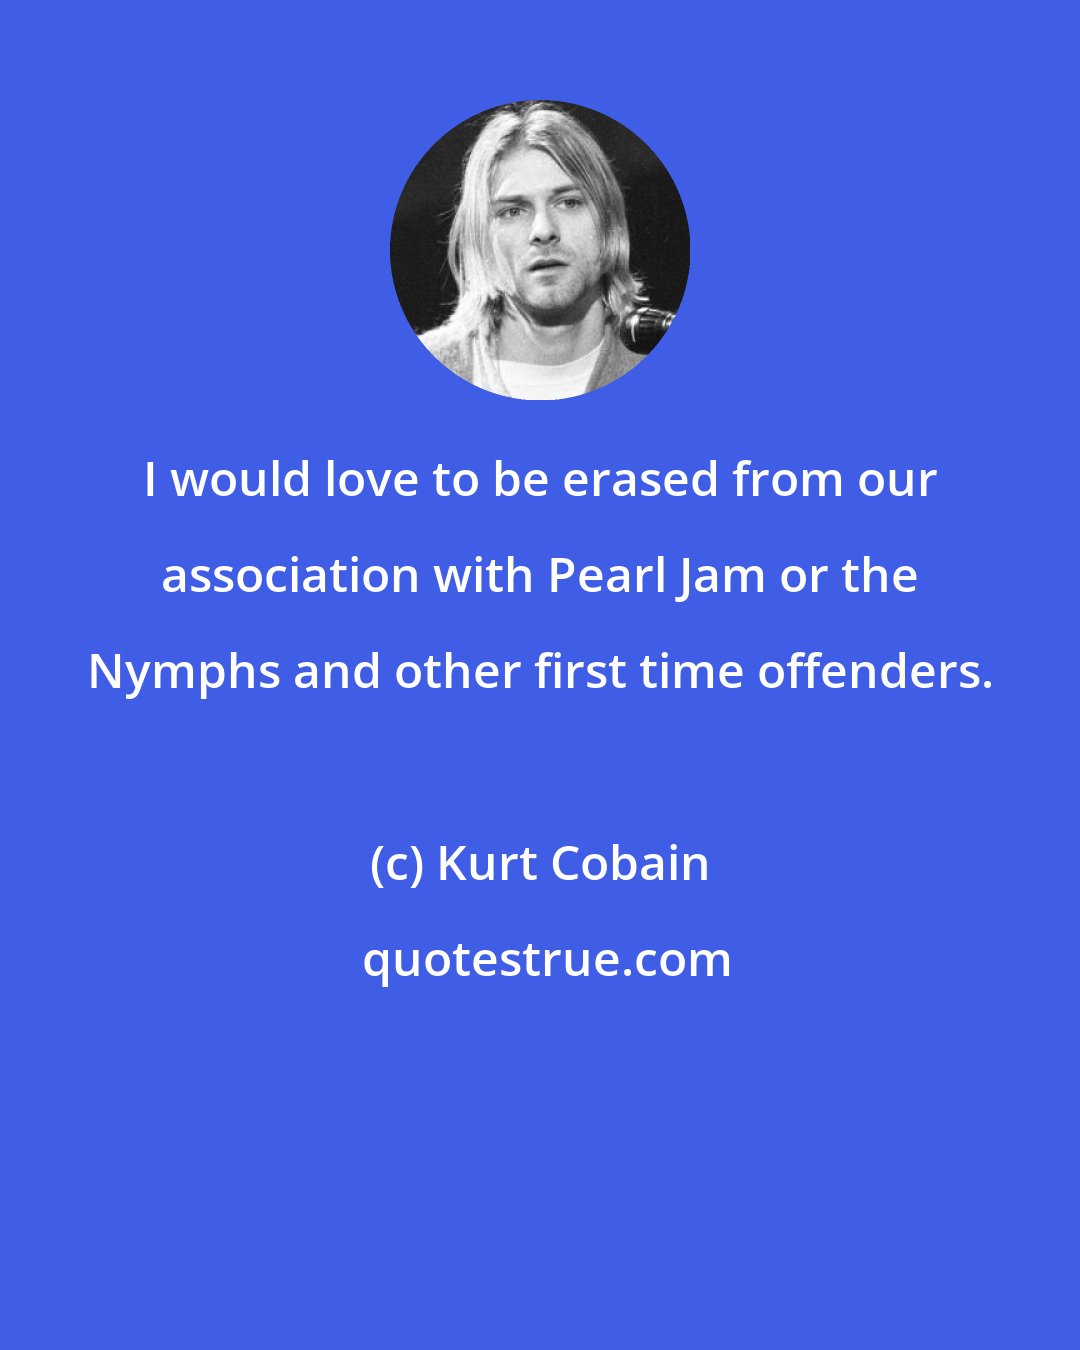 Kurt Cobain: I would love to be erased from our association with Pearl Jam or the Nymphs and other first time offenders.